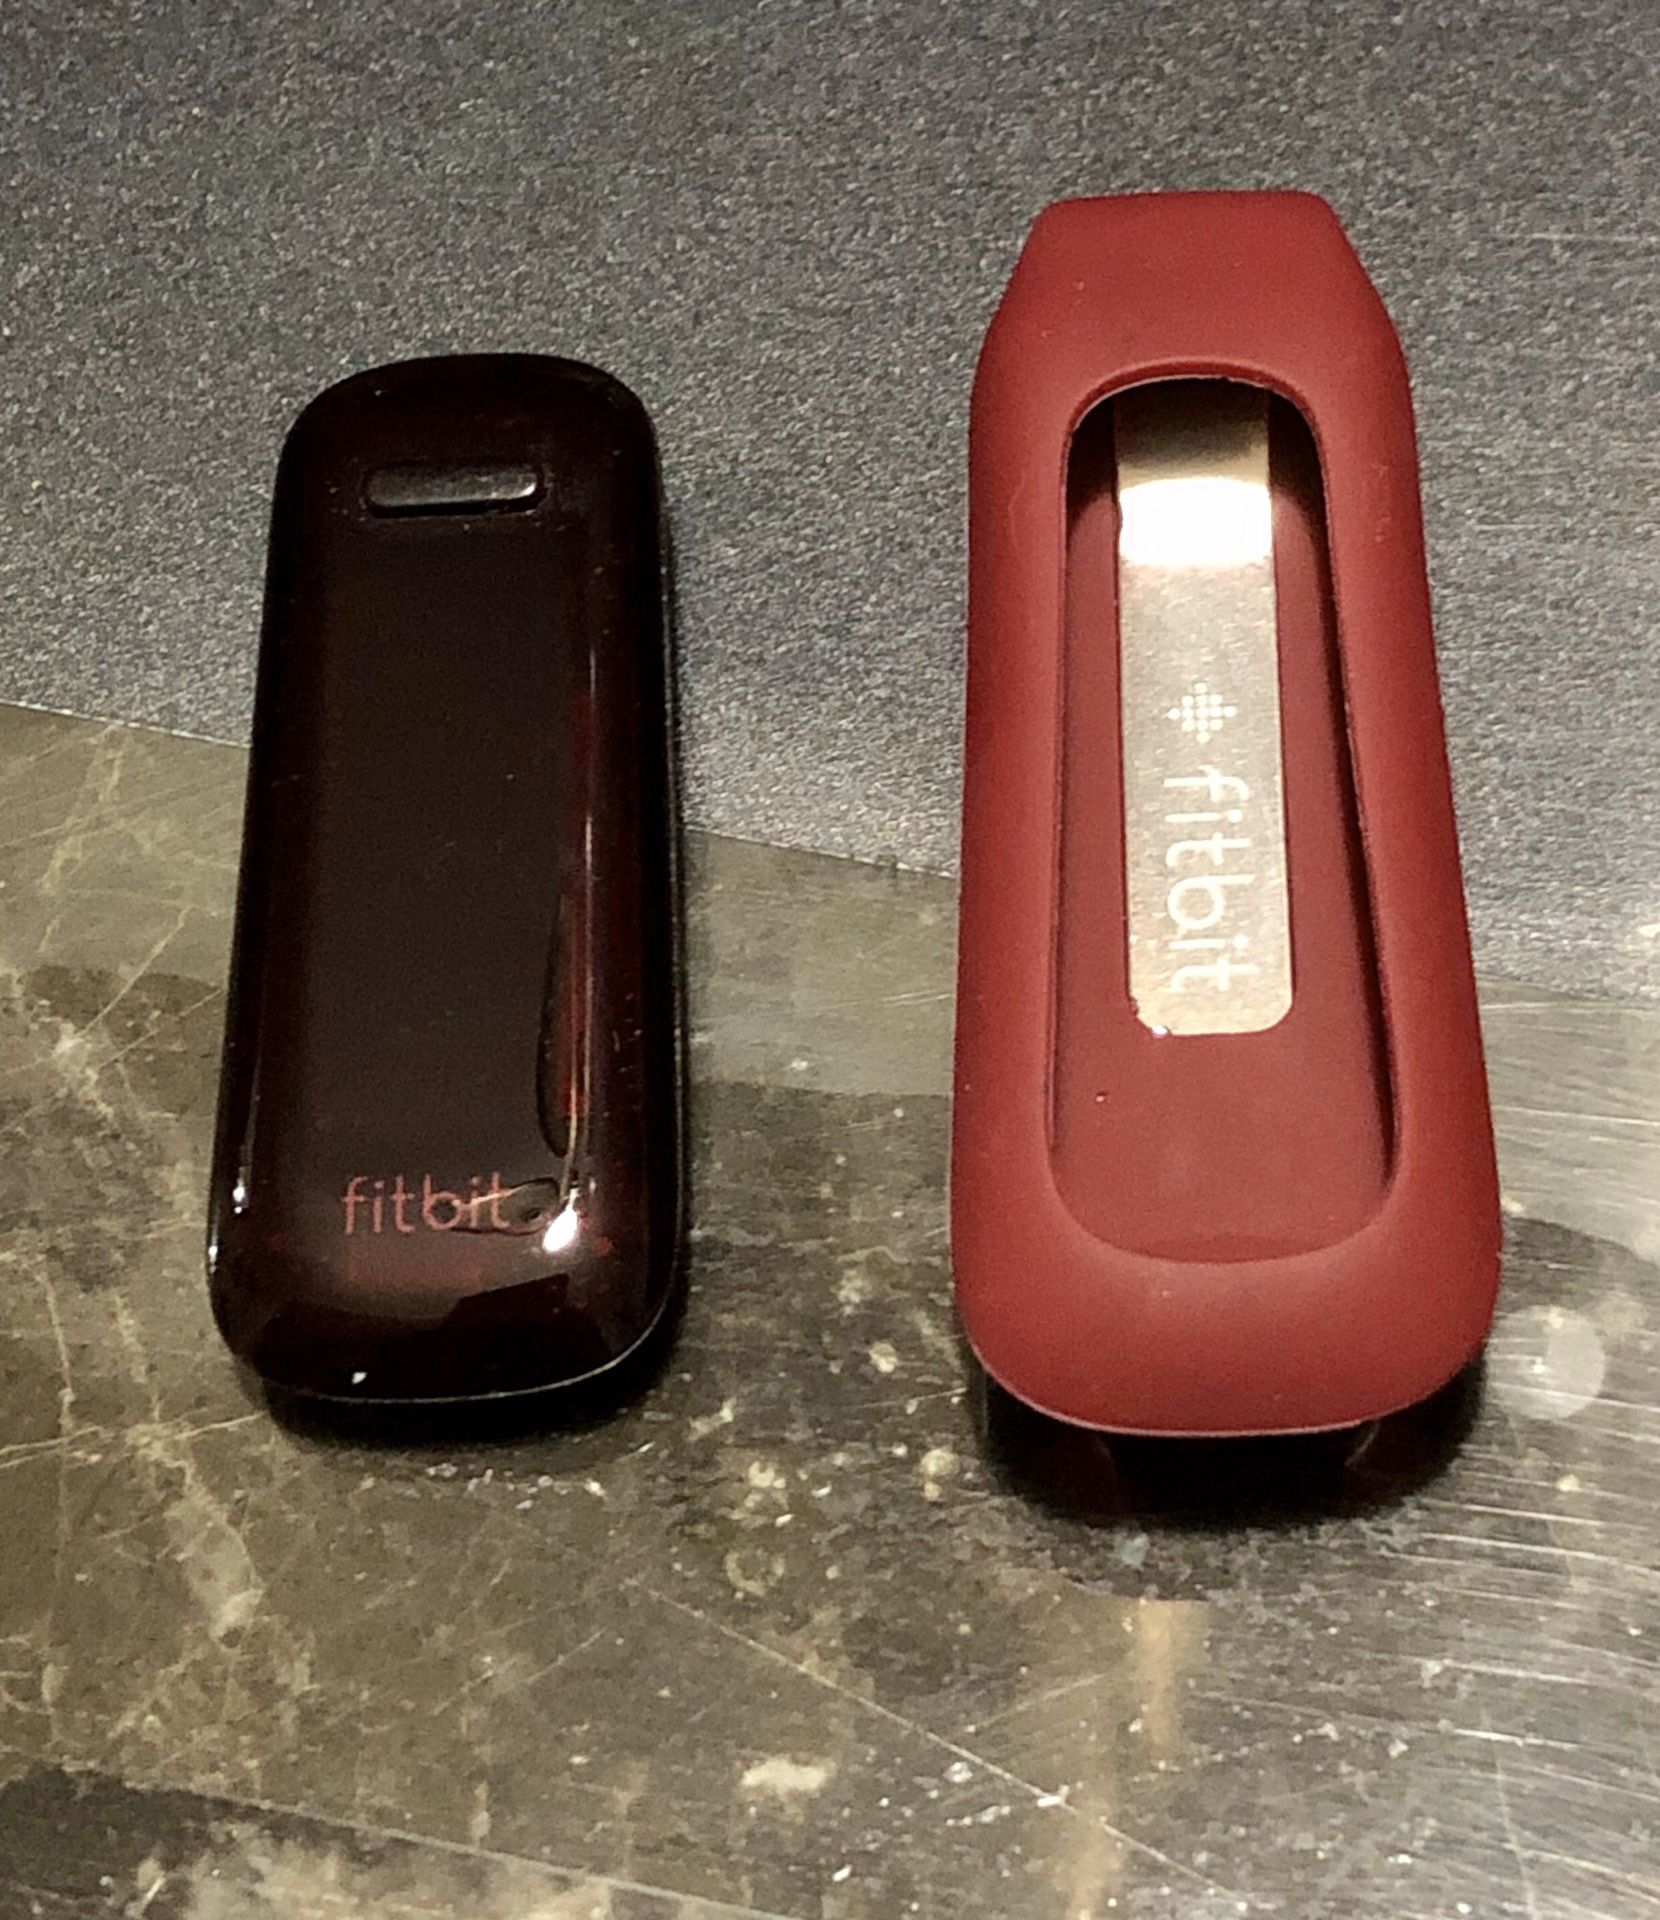 Fitbit One FB103 wireless activity with a clip carry case